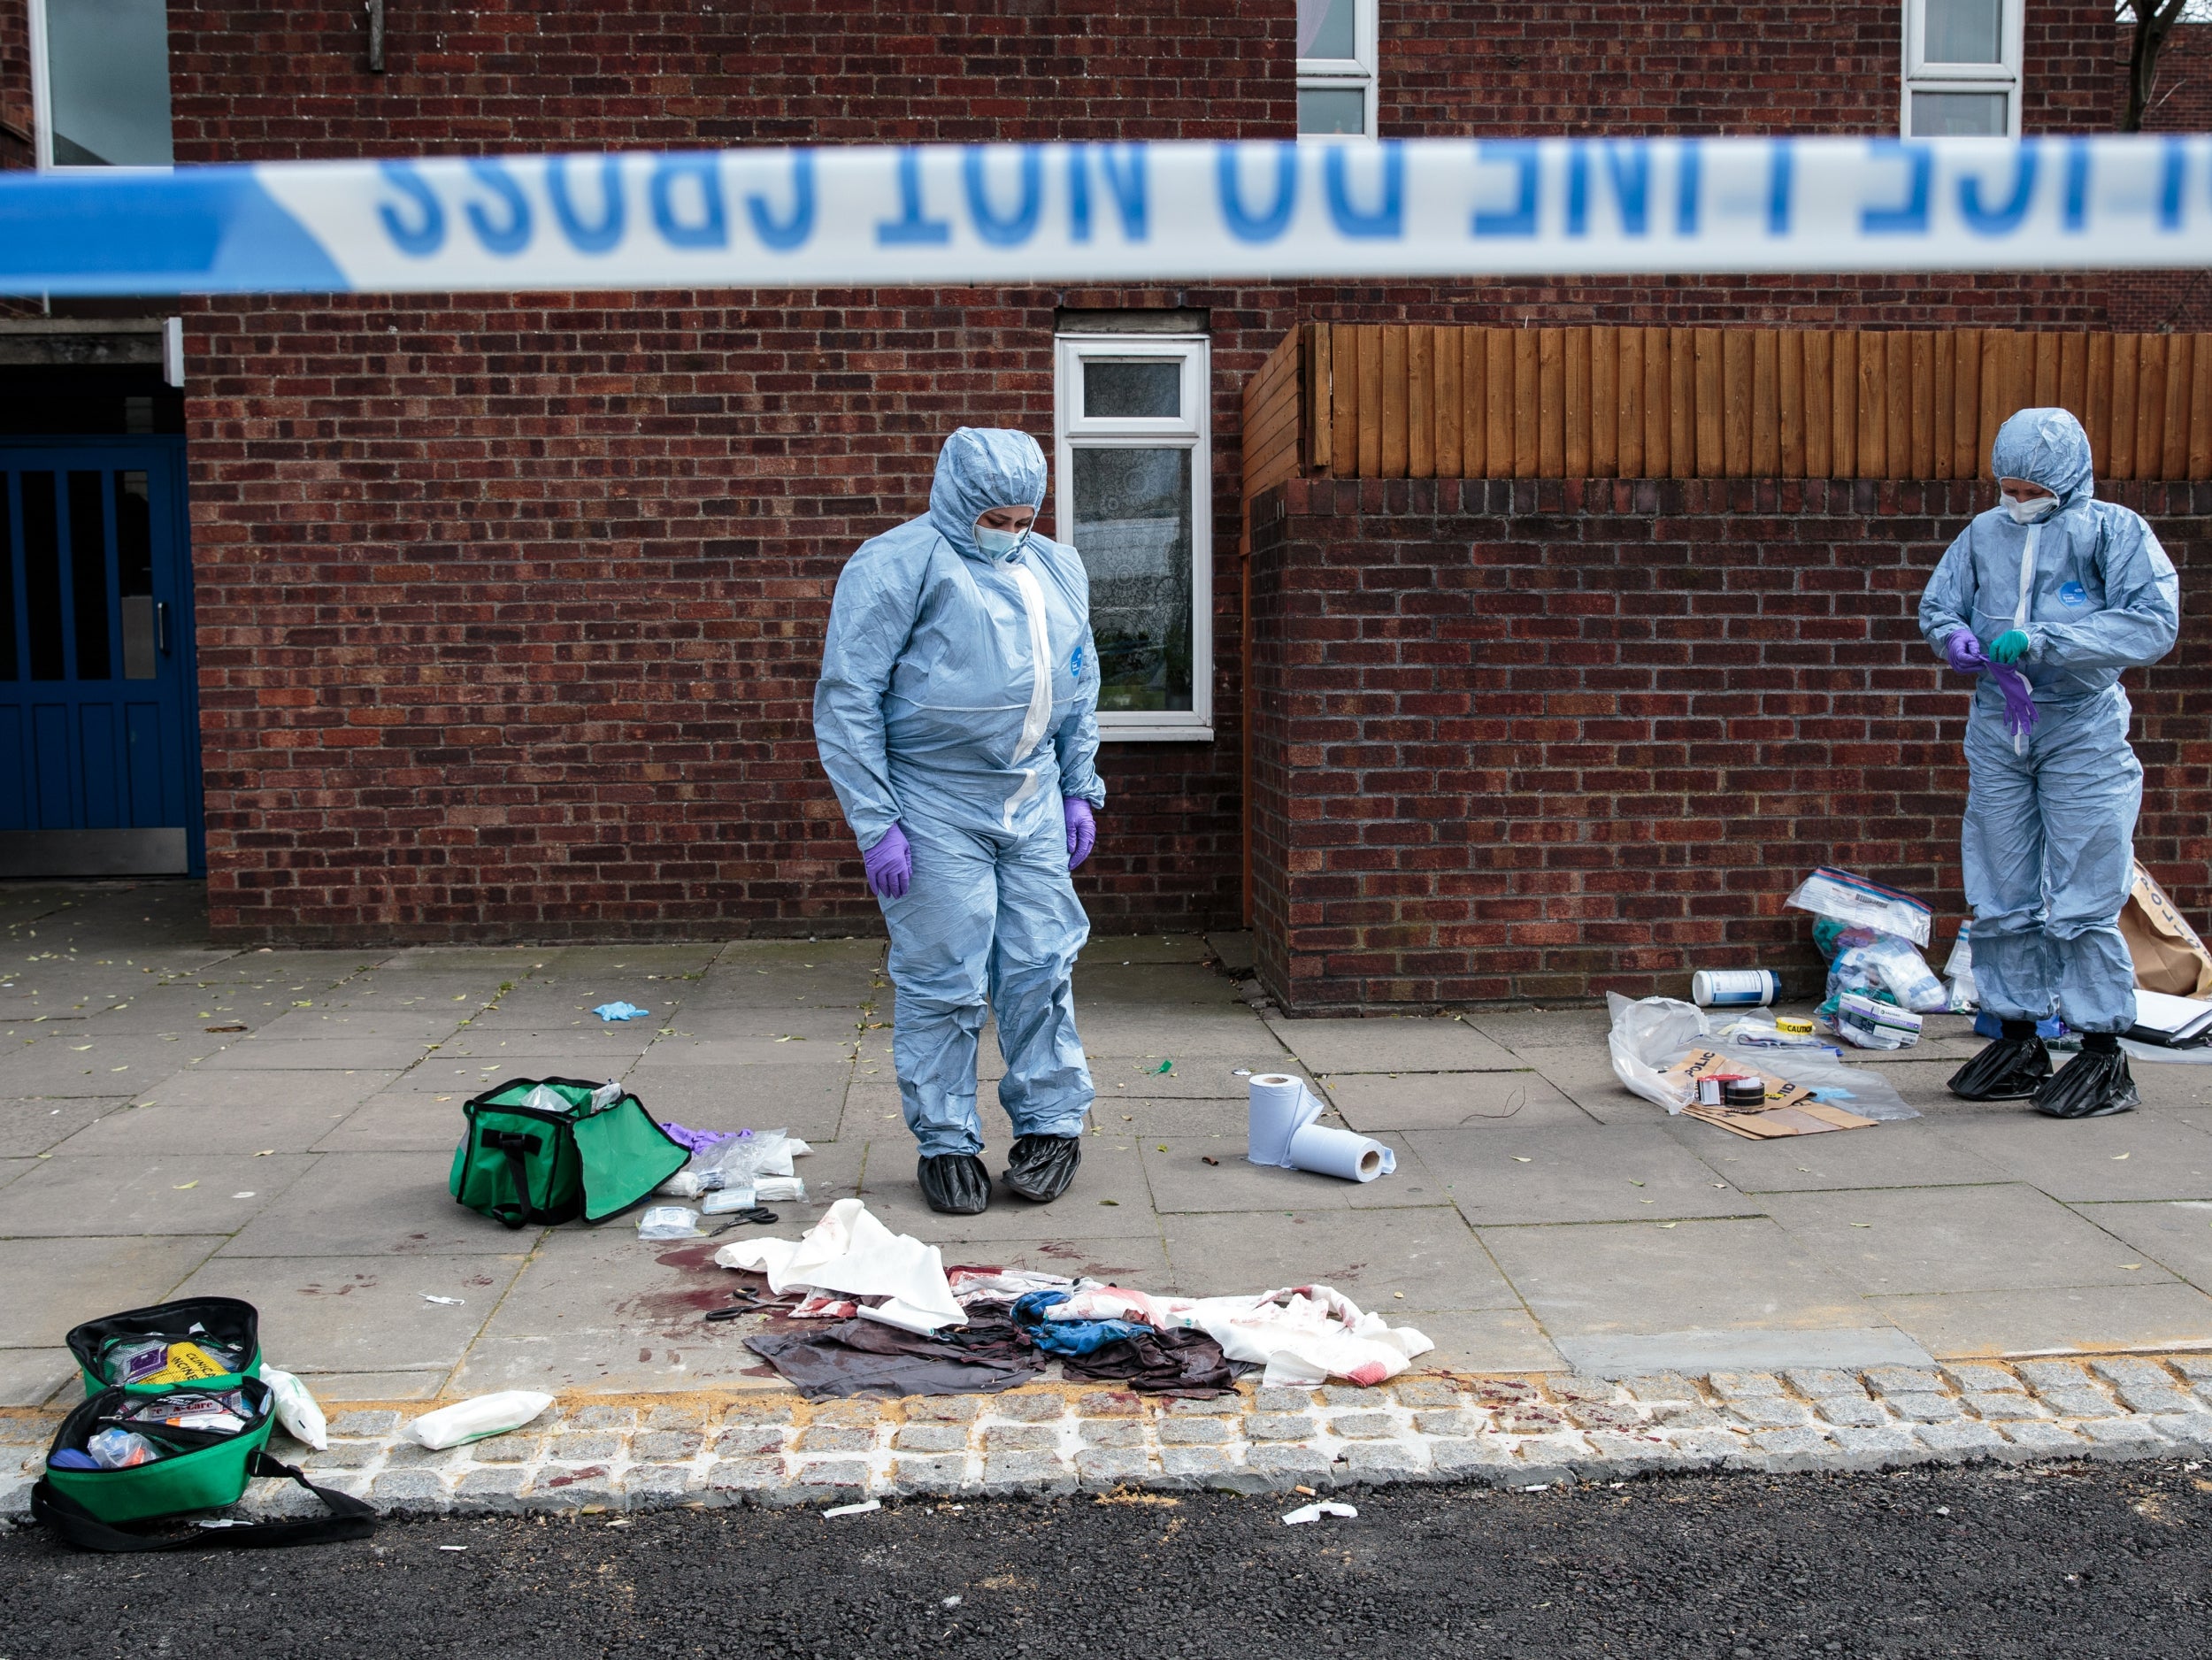 Forensics teams work at the scene of a stabbing in Edmonton (Getty Images)